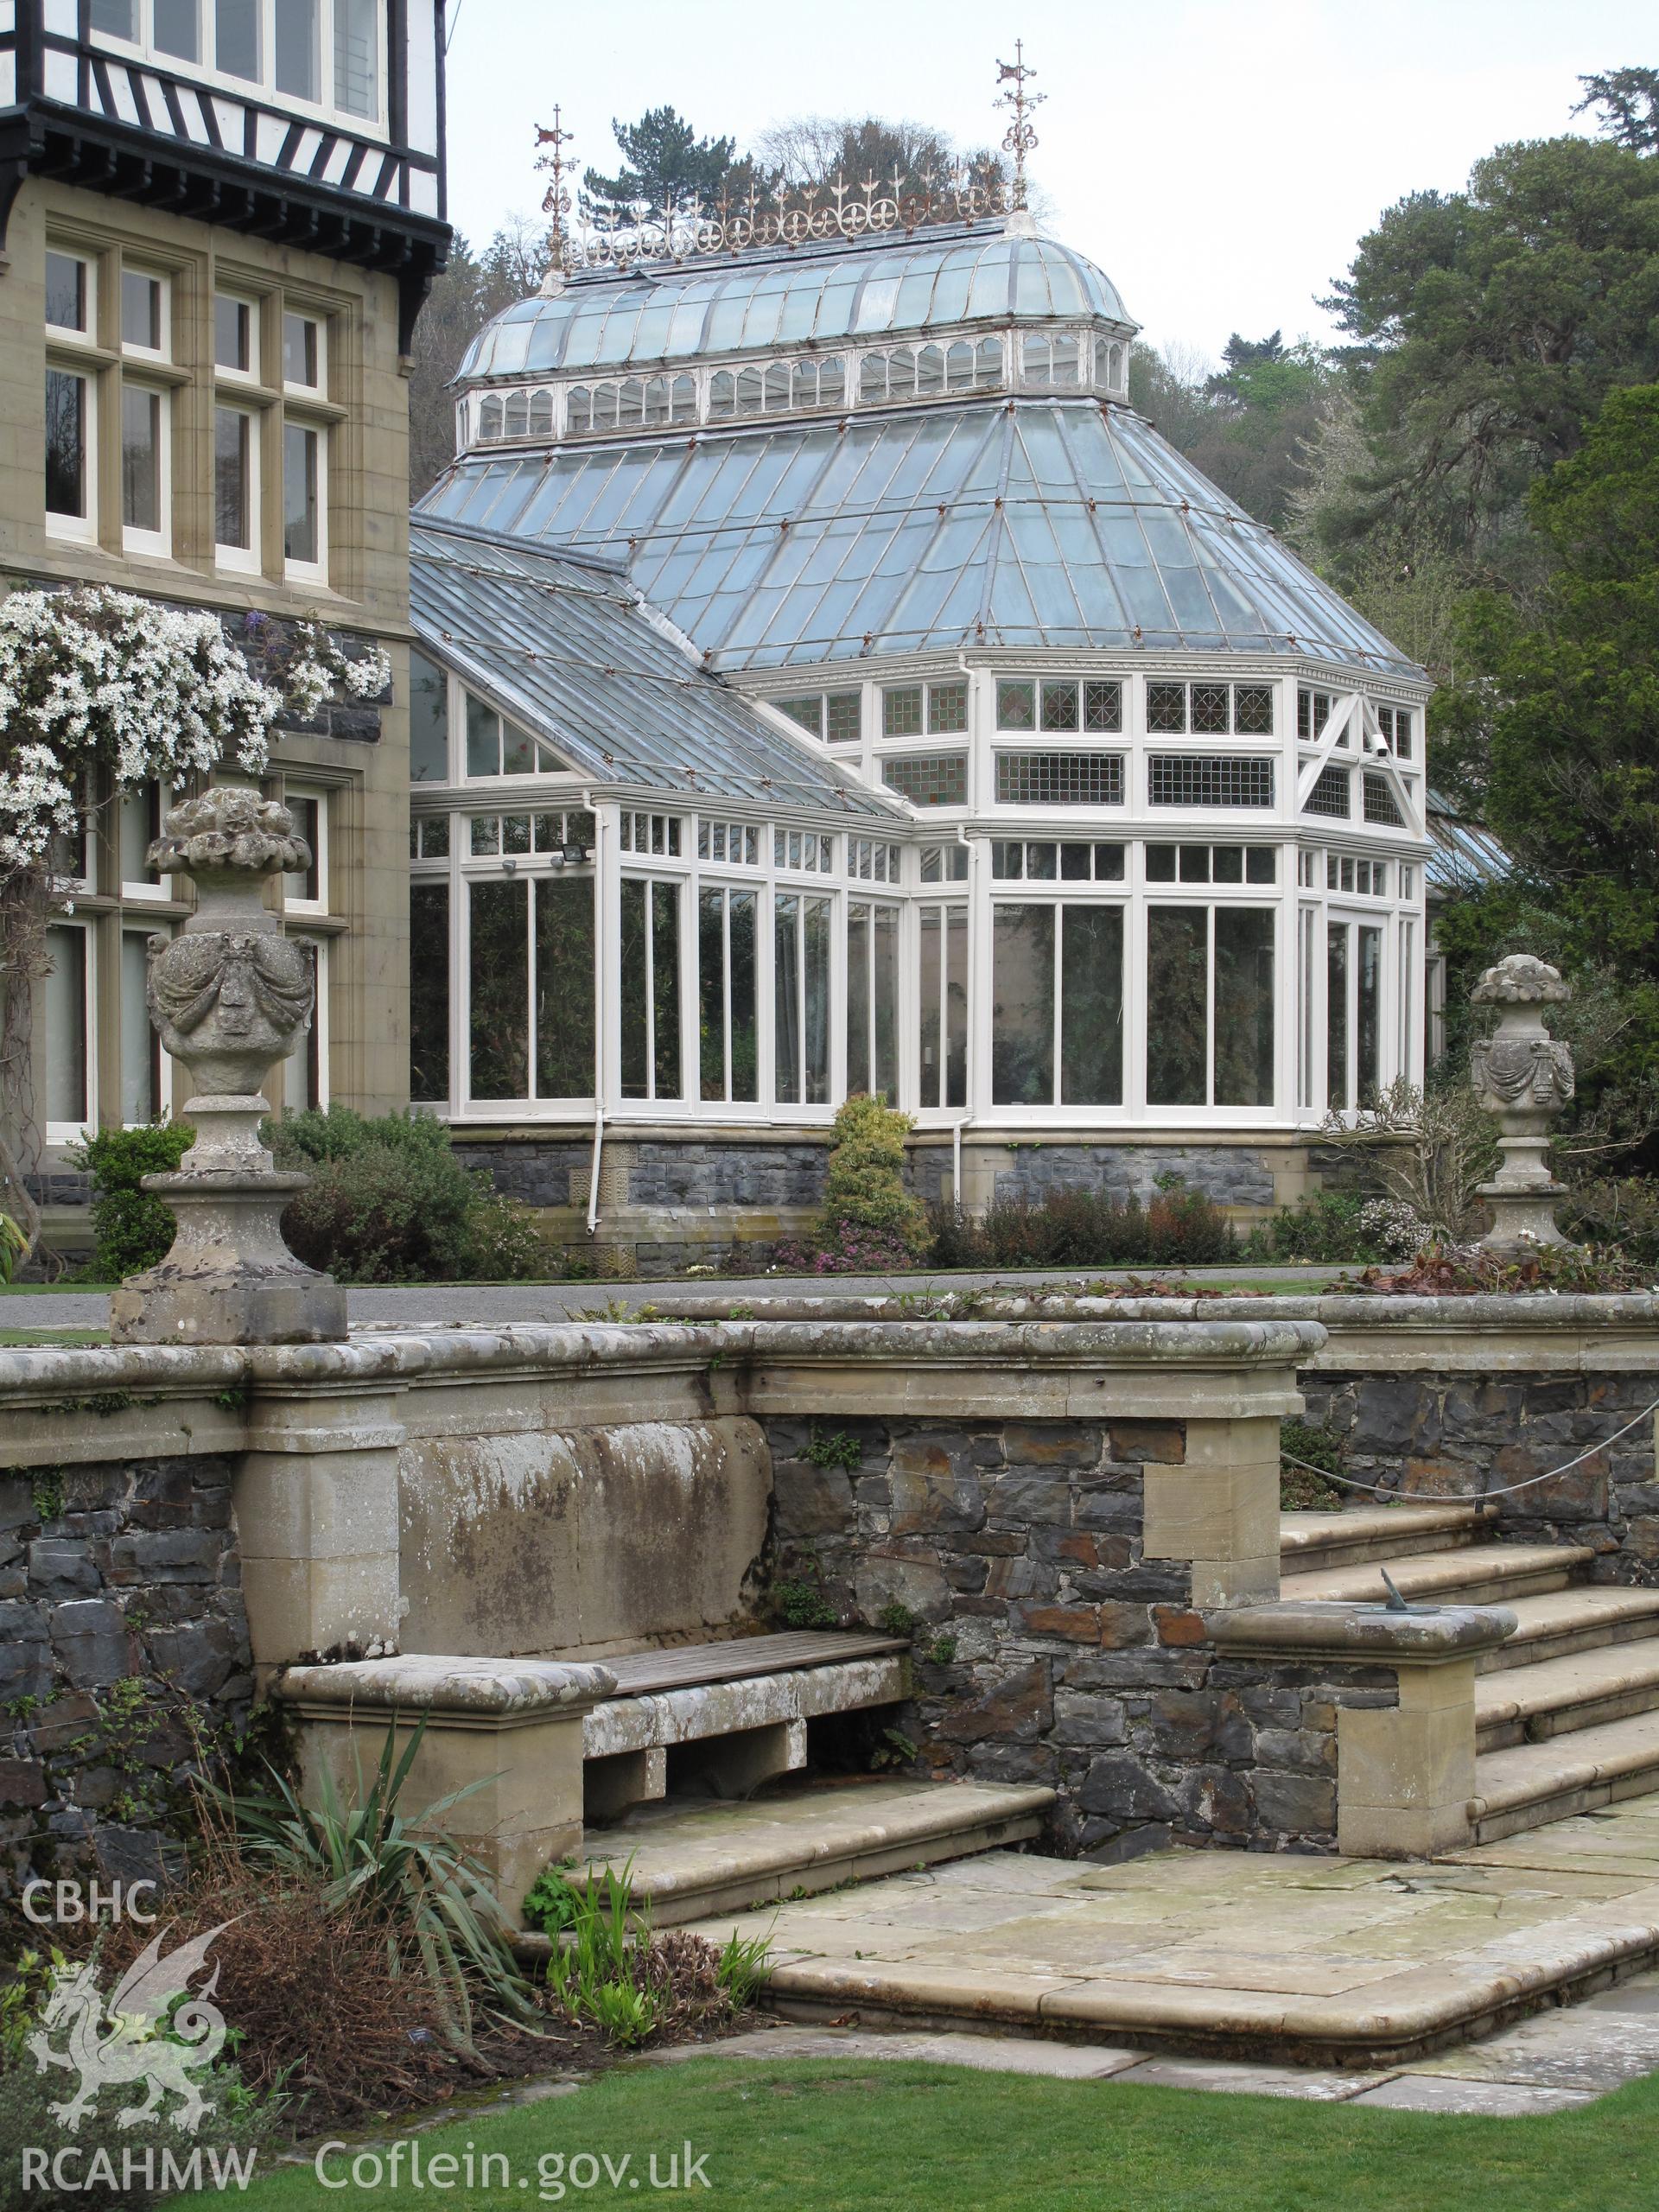 The Conservatory viewed from the south.